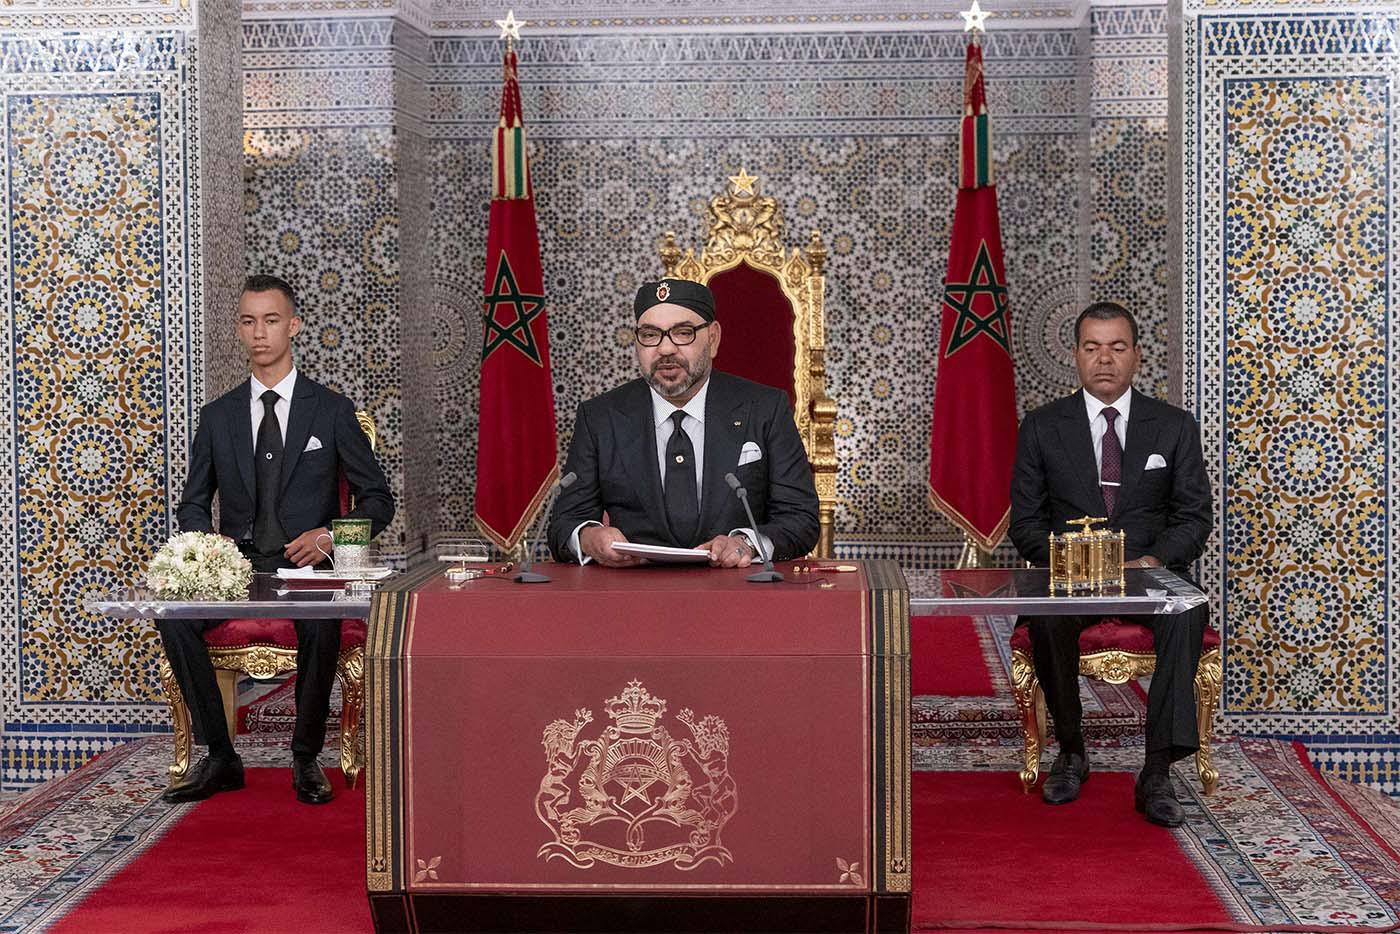 Morocco's King Mohammed VI has marked 20 years on the throne 